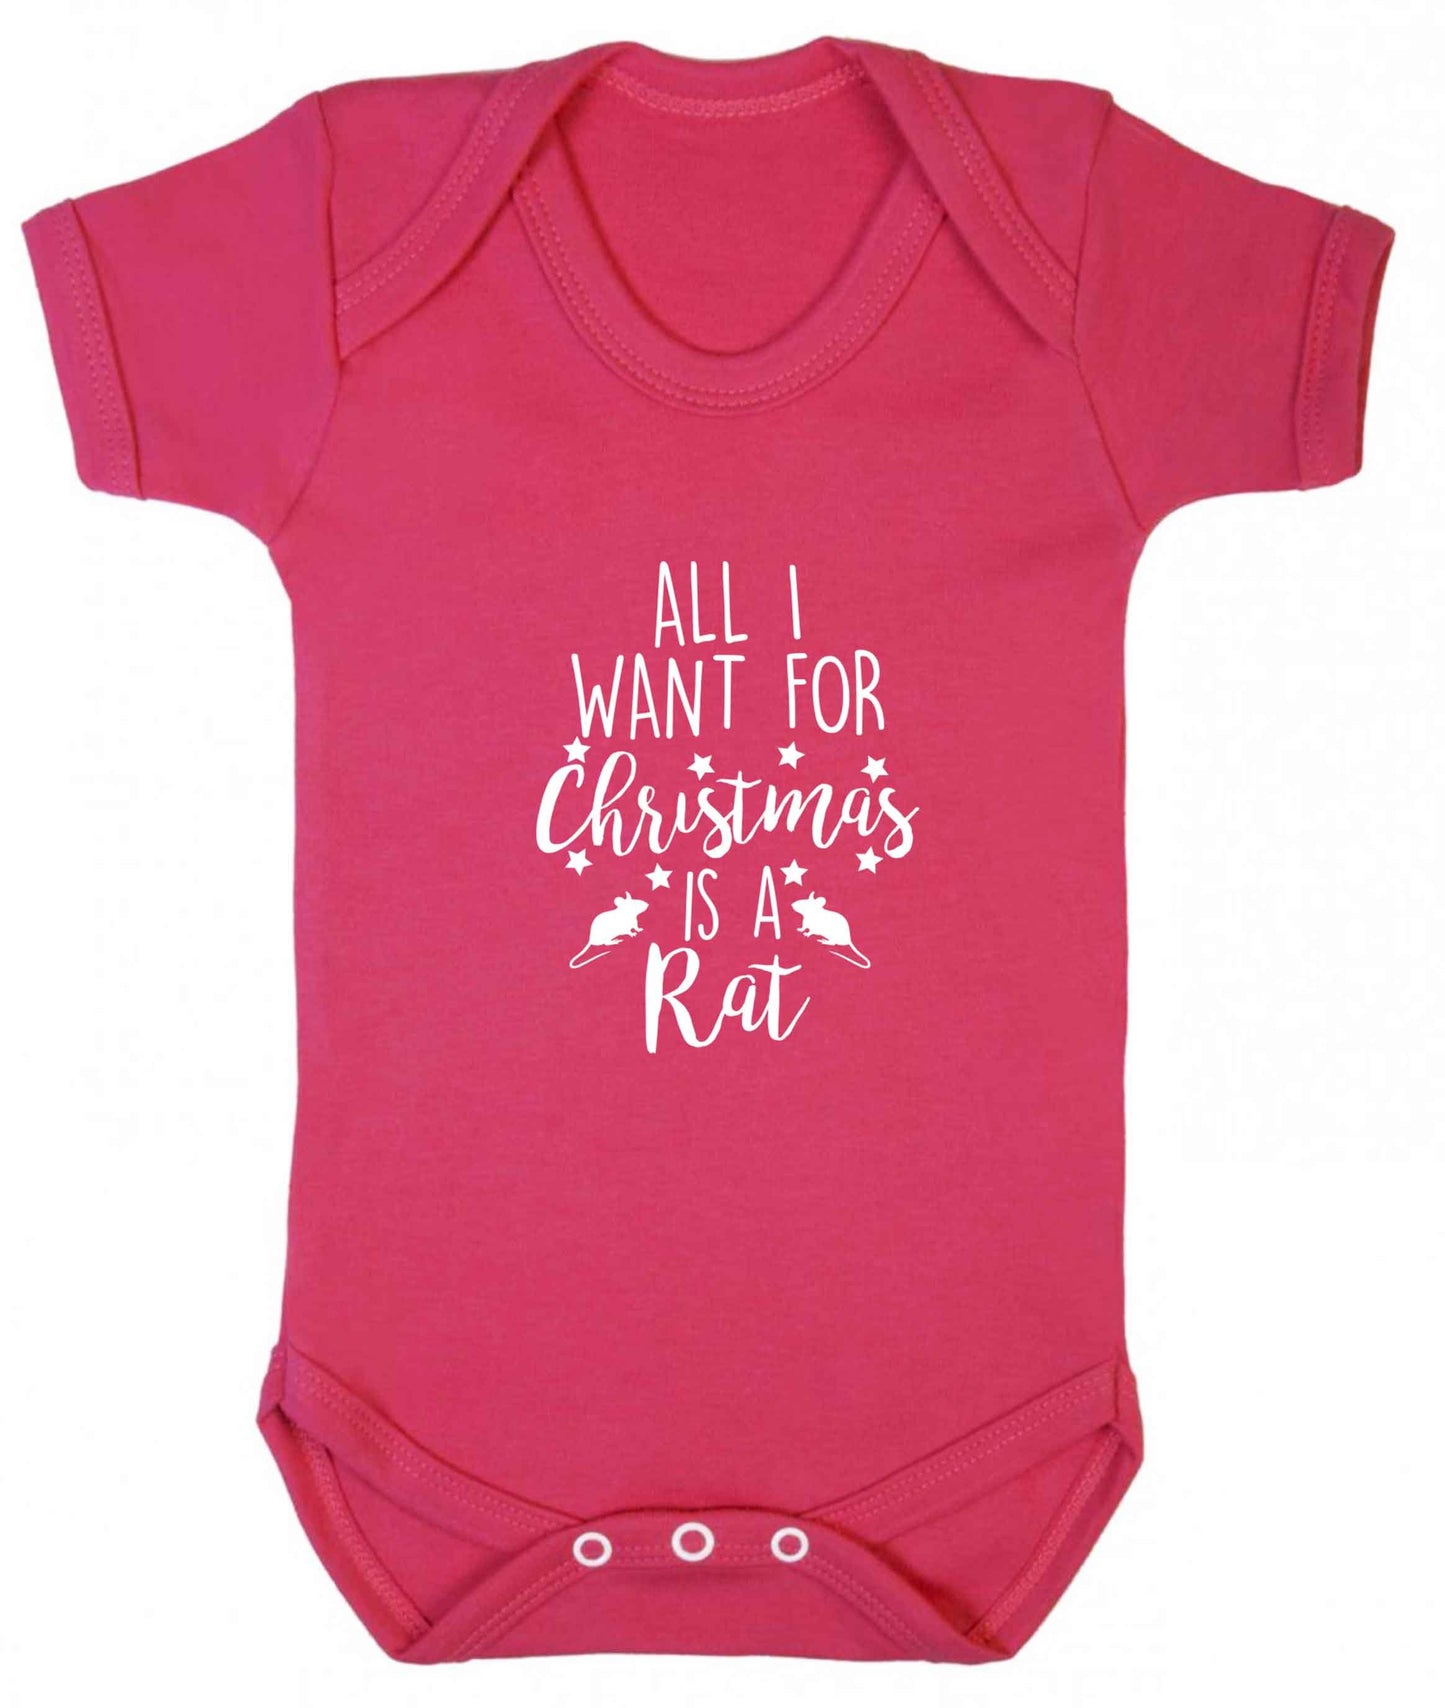 All I want for Christmas is a rat baby vest dark pink 18-24 months